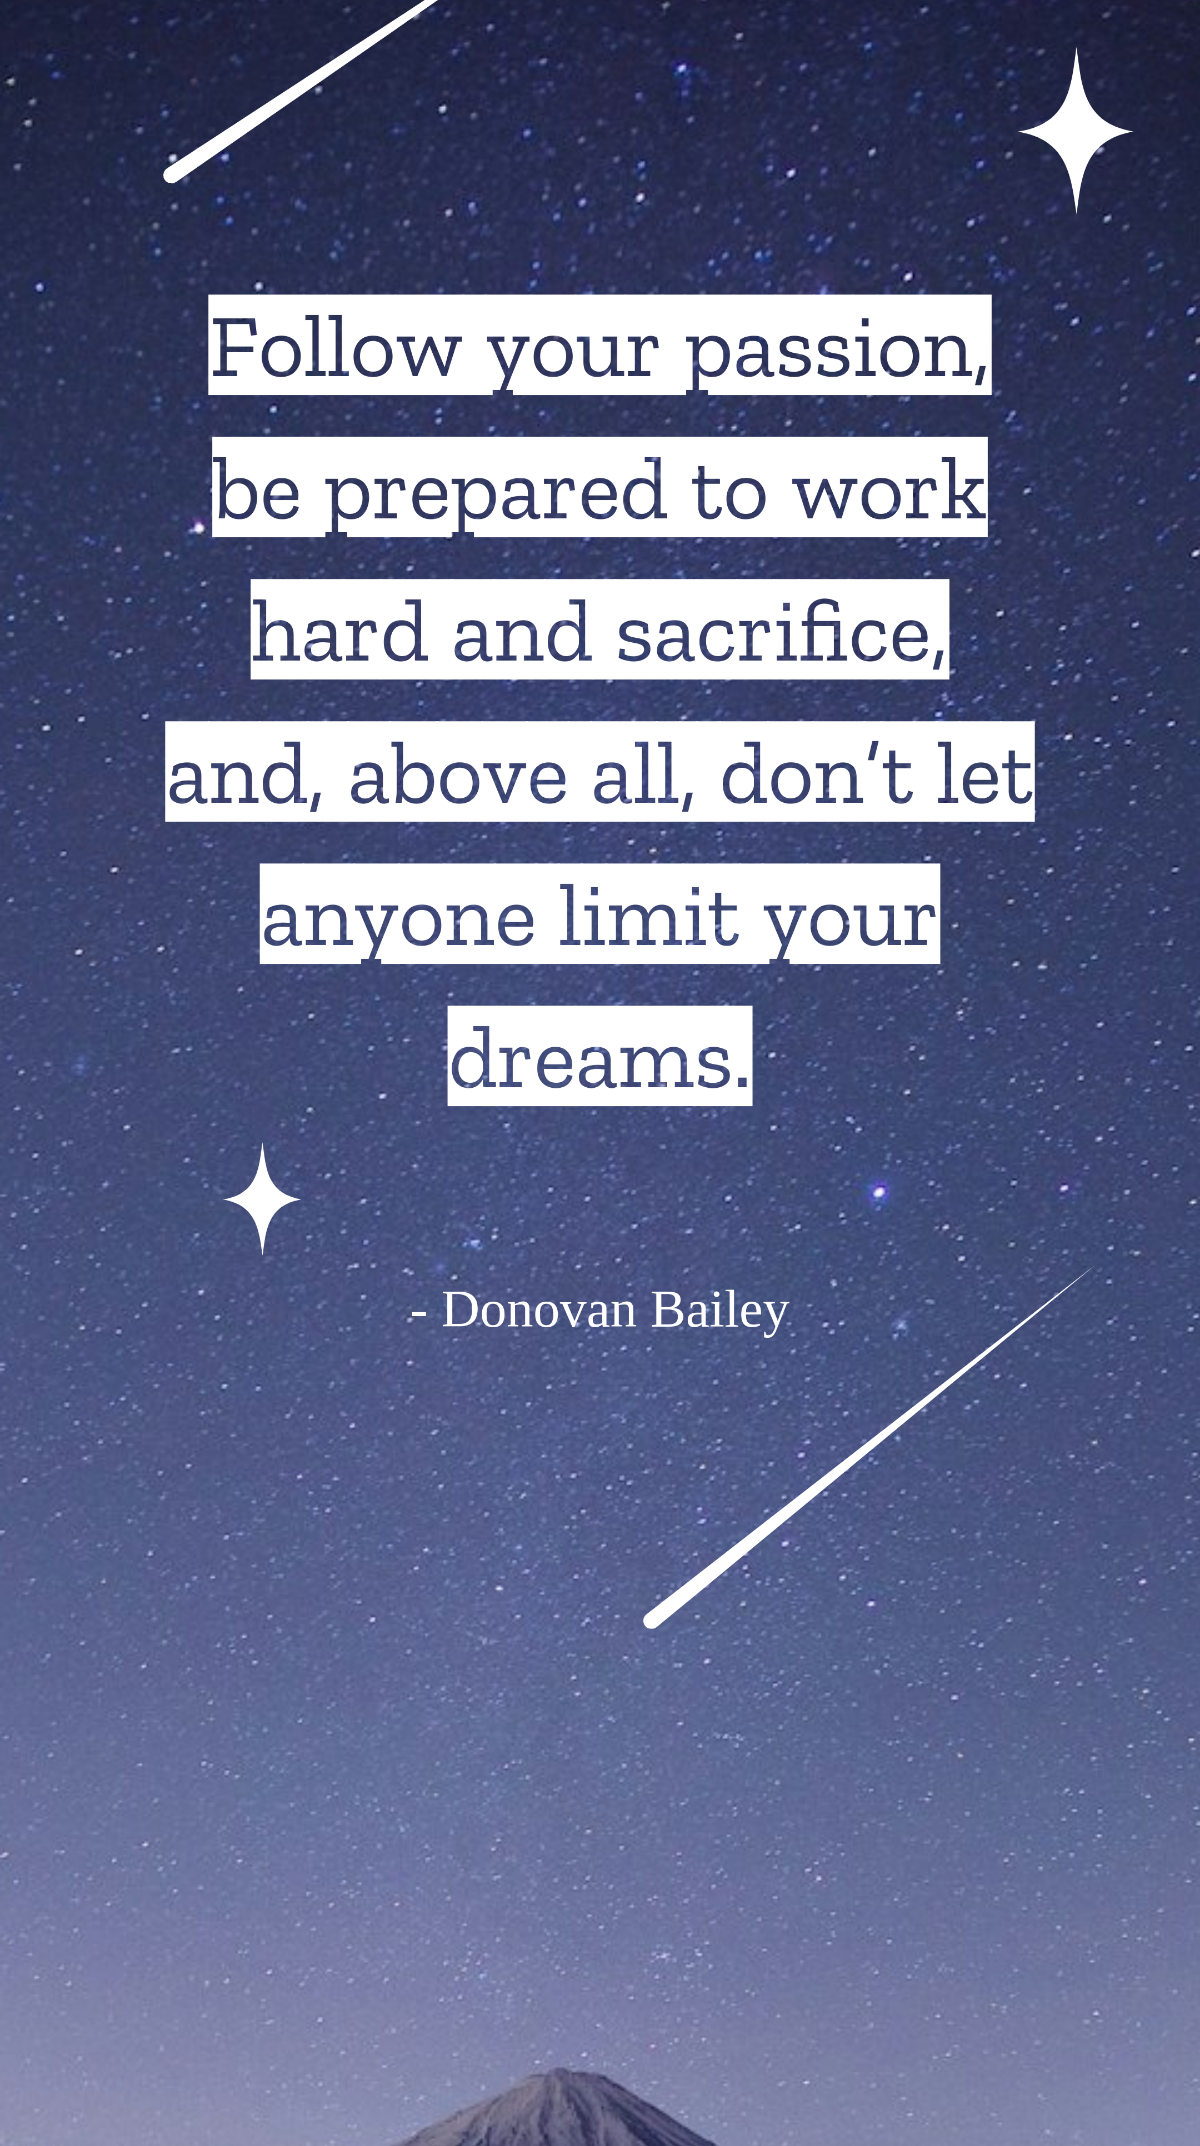 Donovan Bailey - Follow your passion, be prepared to work hard and sacrifice, and, above all, don’t let anyone limit your dreams. Template